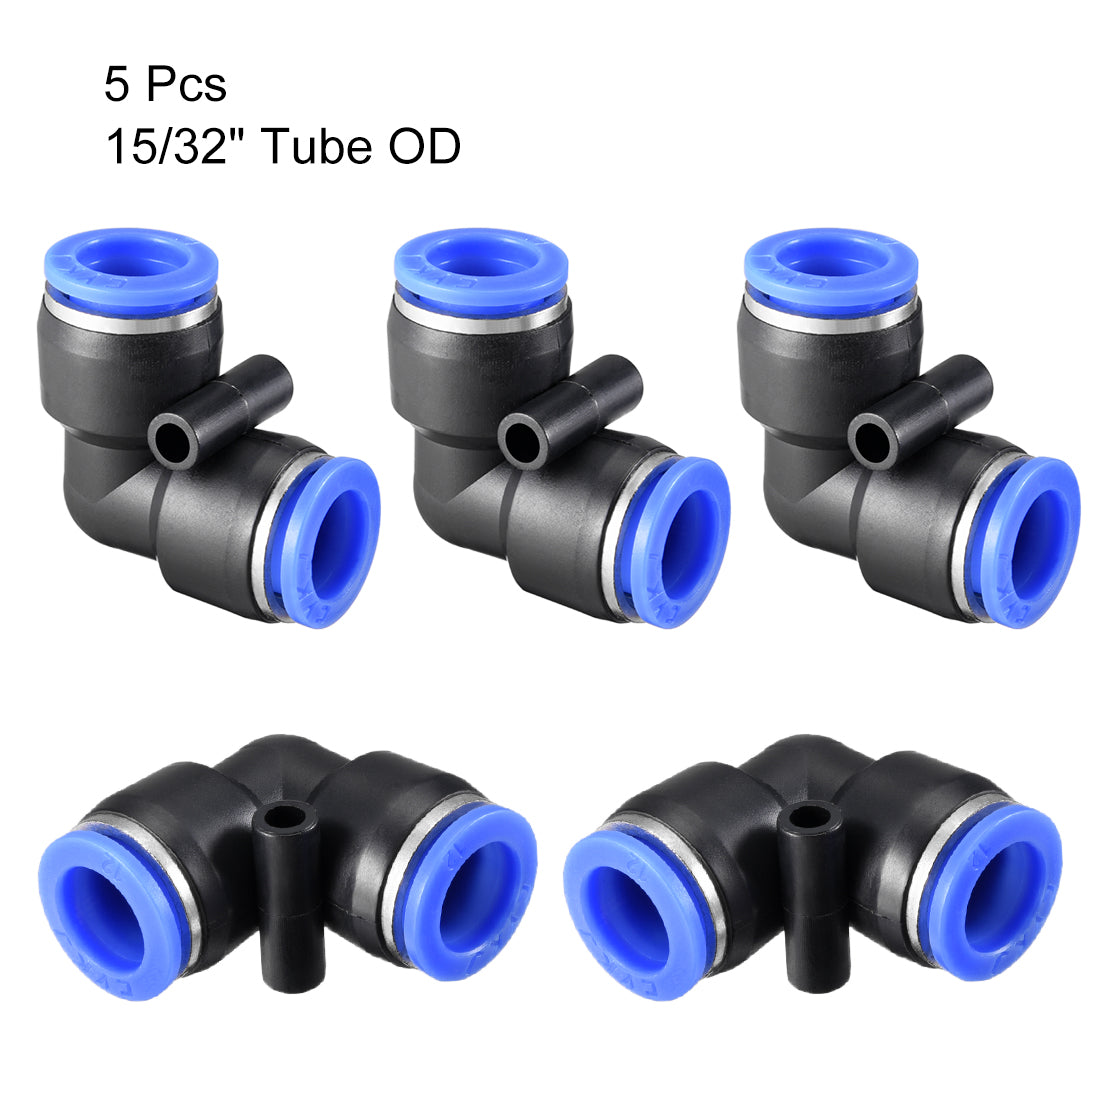 Uxcell Uxcell Plastic Elbow Push to Connect Tube Fitting 14mm Tube OD Blue 5pcs